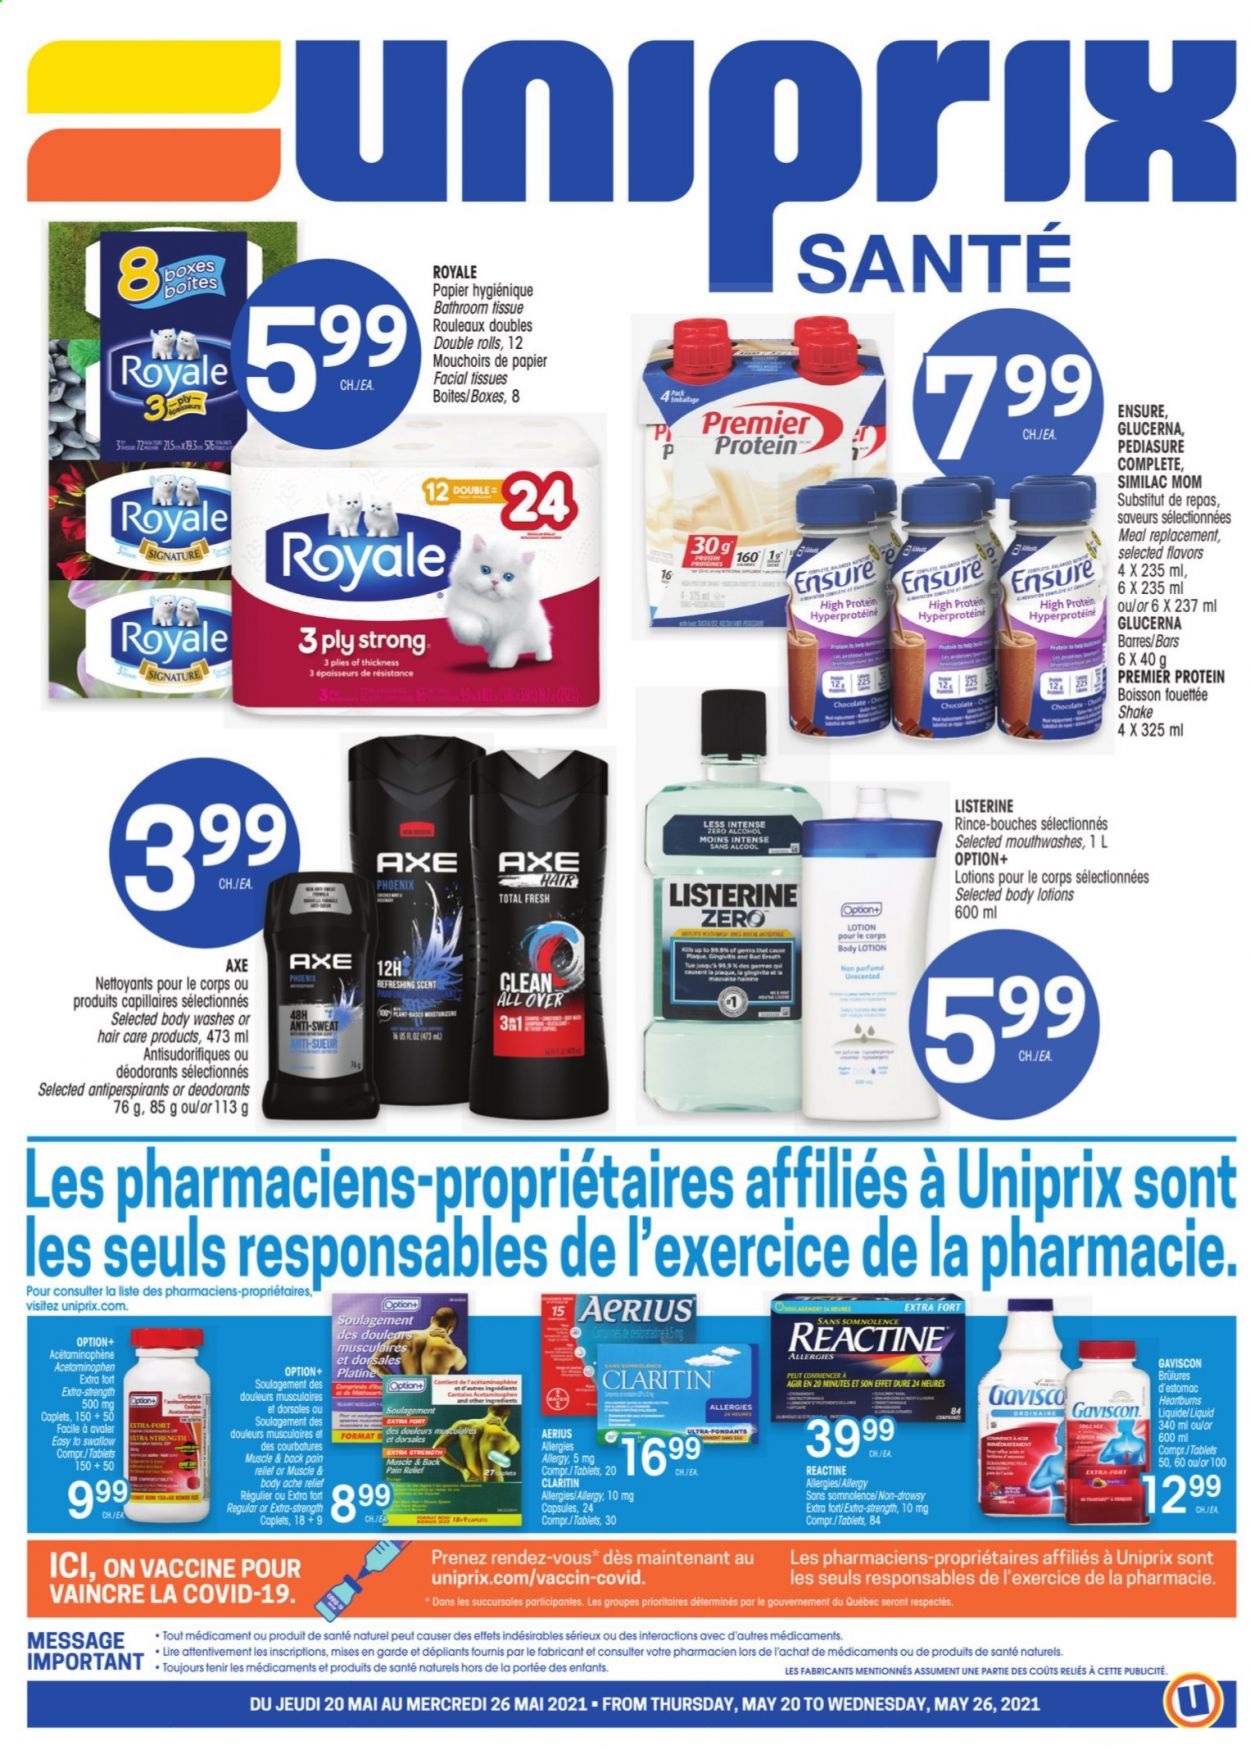 thumbnail - Uniprix Santé Flyer - May 20, 2021 - May 26, 2021 - Sales products - chocolate, Similac, bath tissue, facial tissues, body lotion, pain relief, Glucerna, Gaviscon, alcohol, Listerine, deodorant. Page 1.